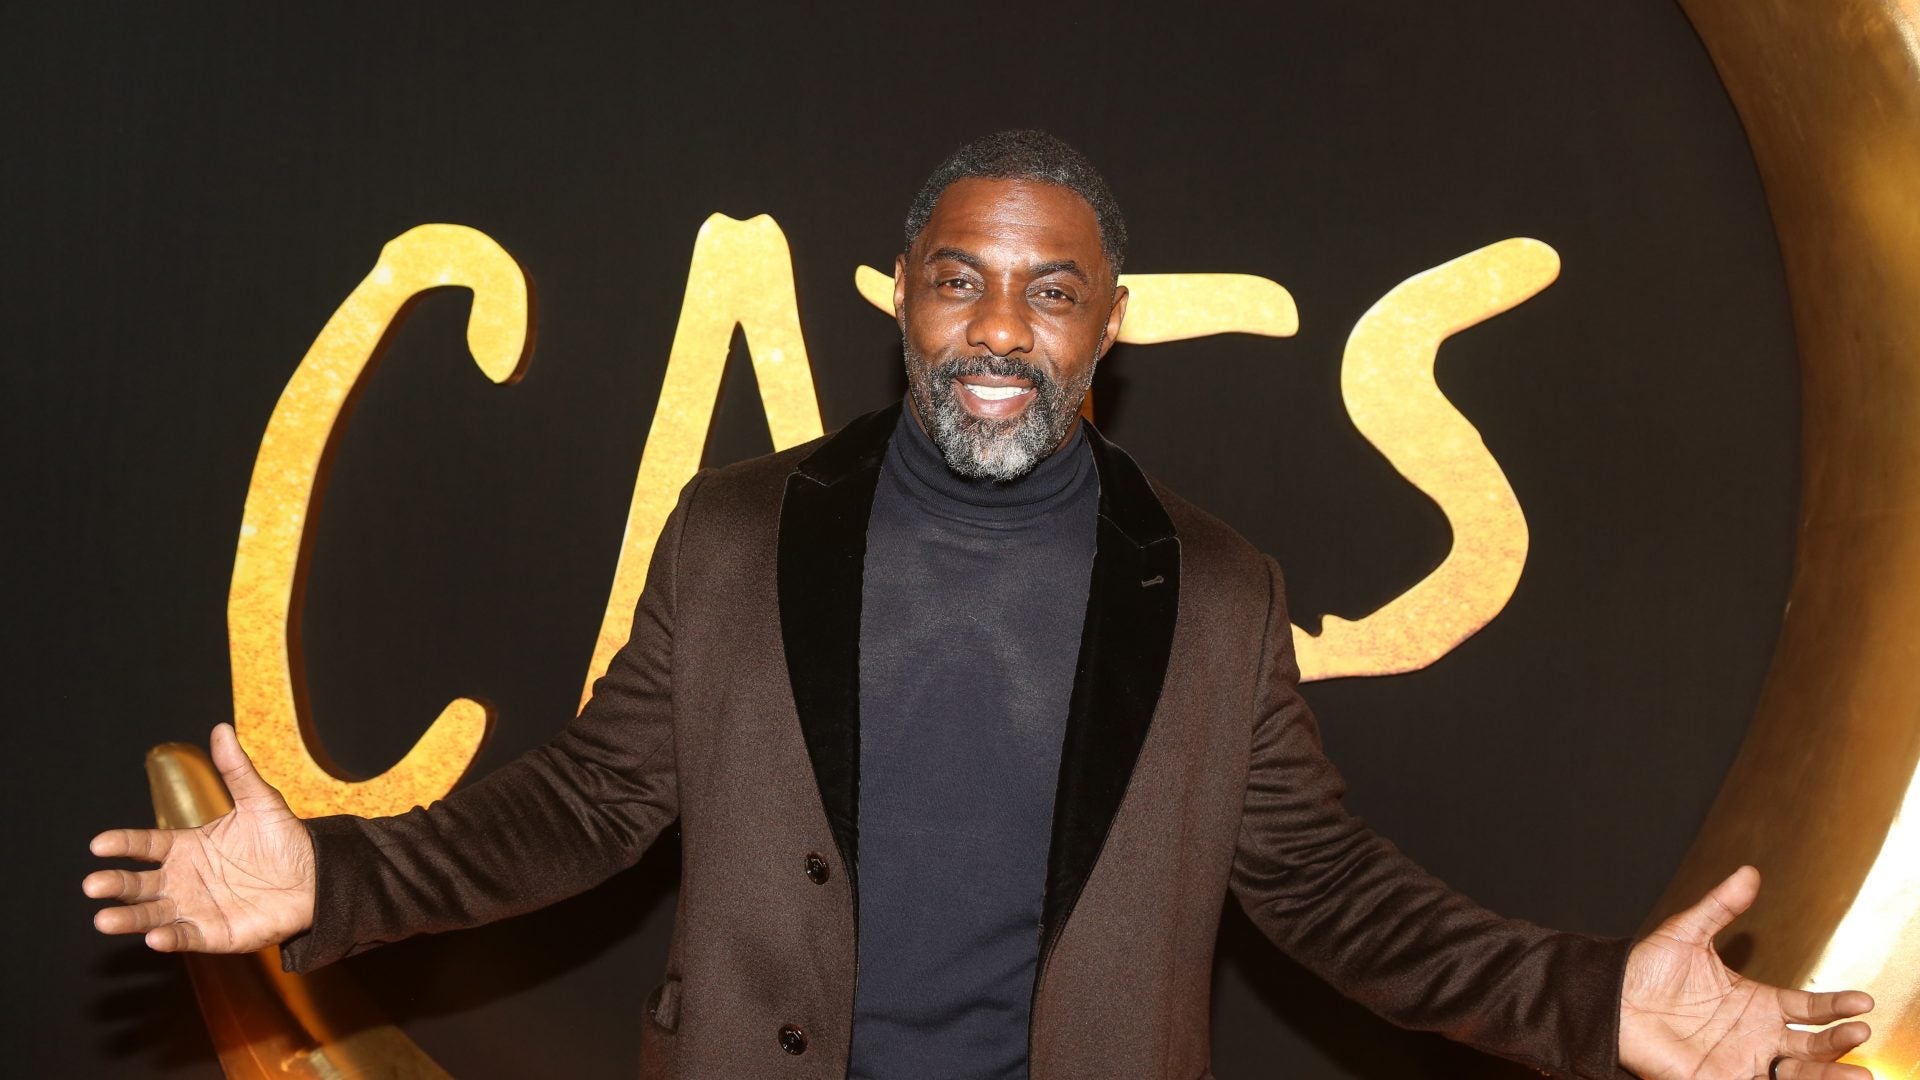 We Asked 'Cats' Cast: What If You Had 9 Lives?